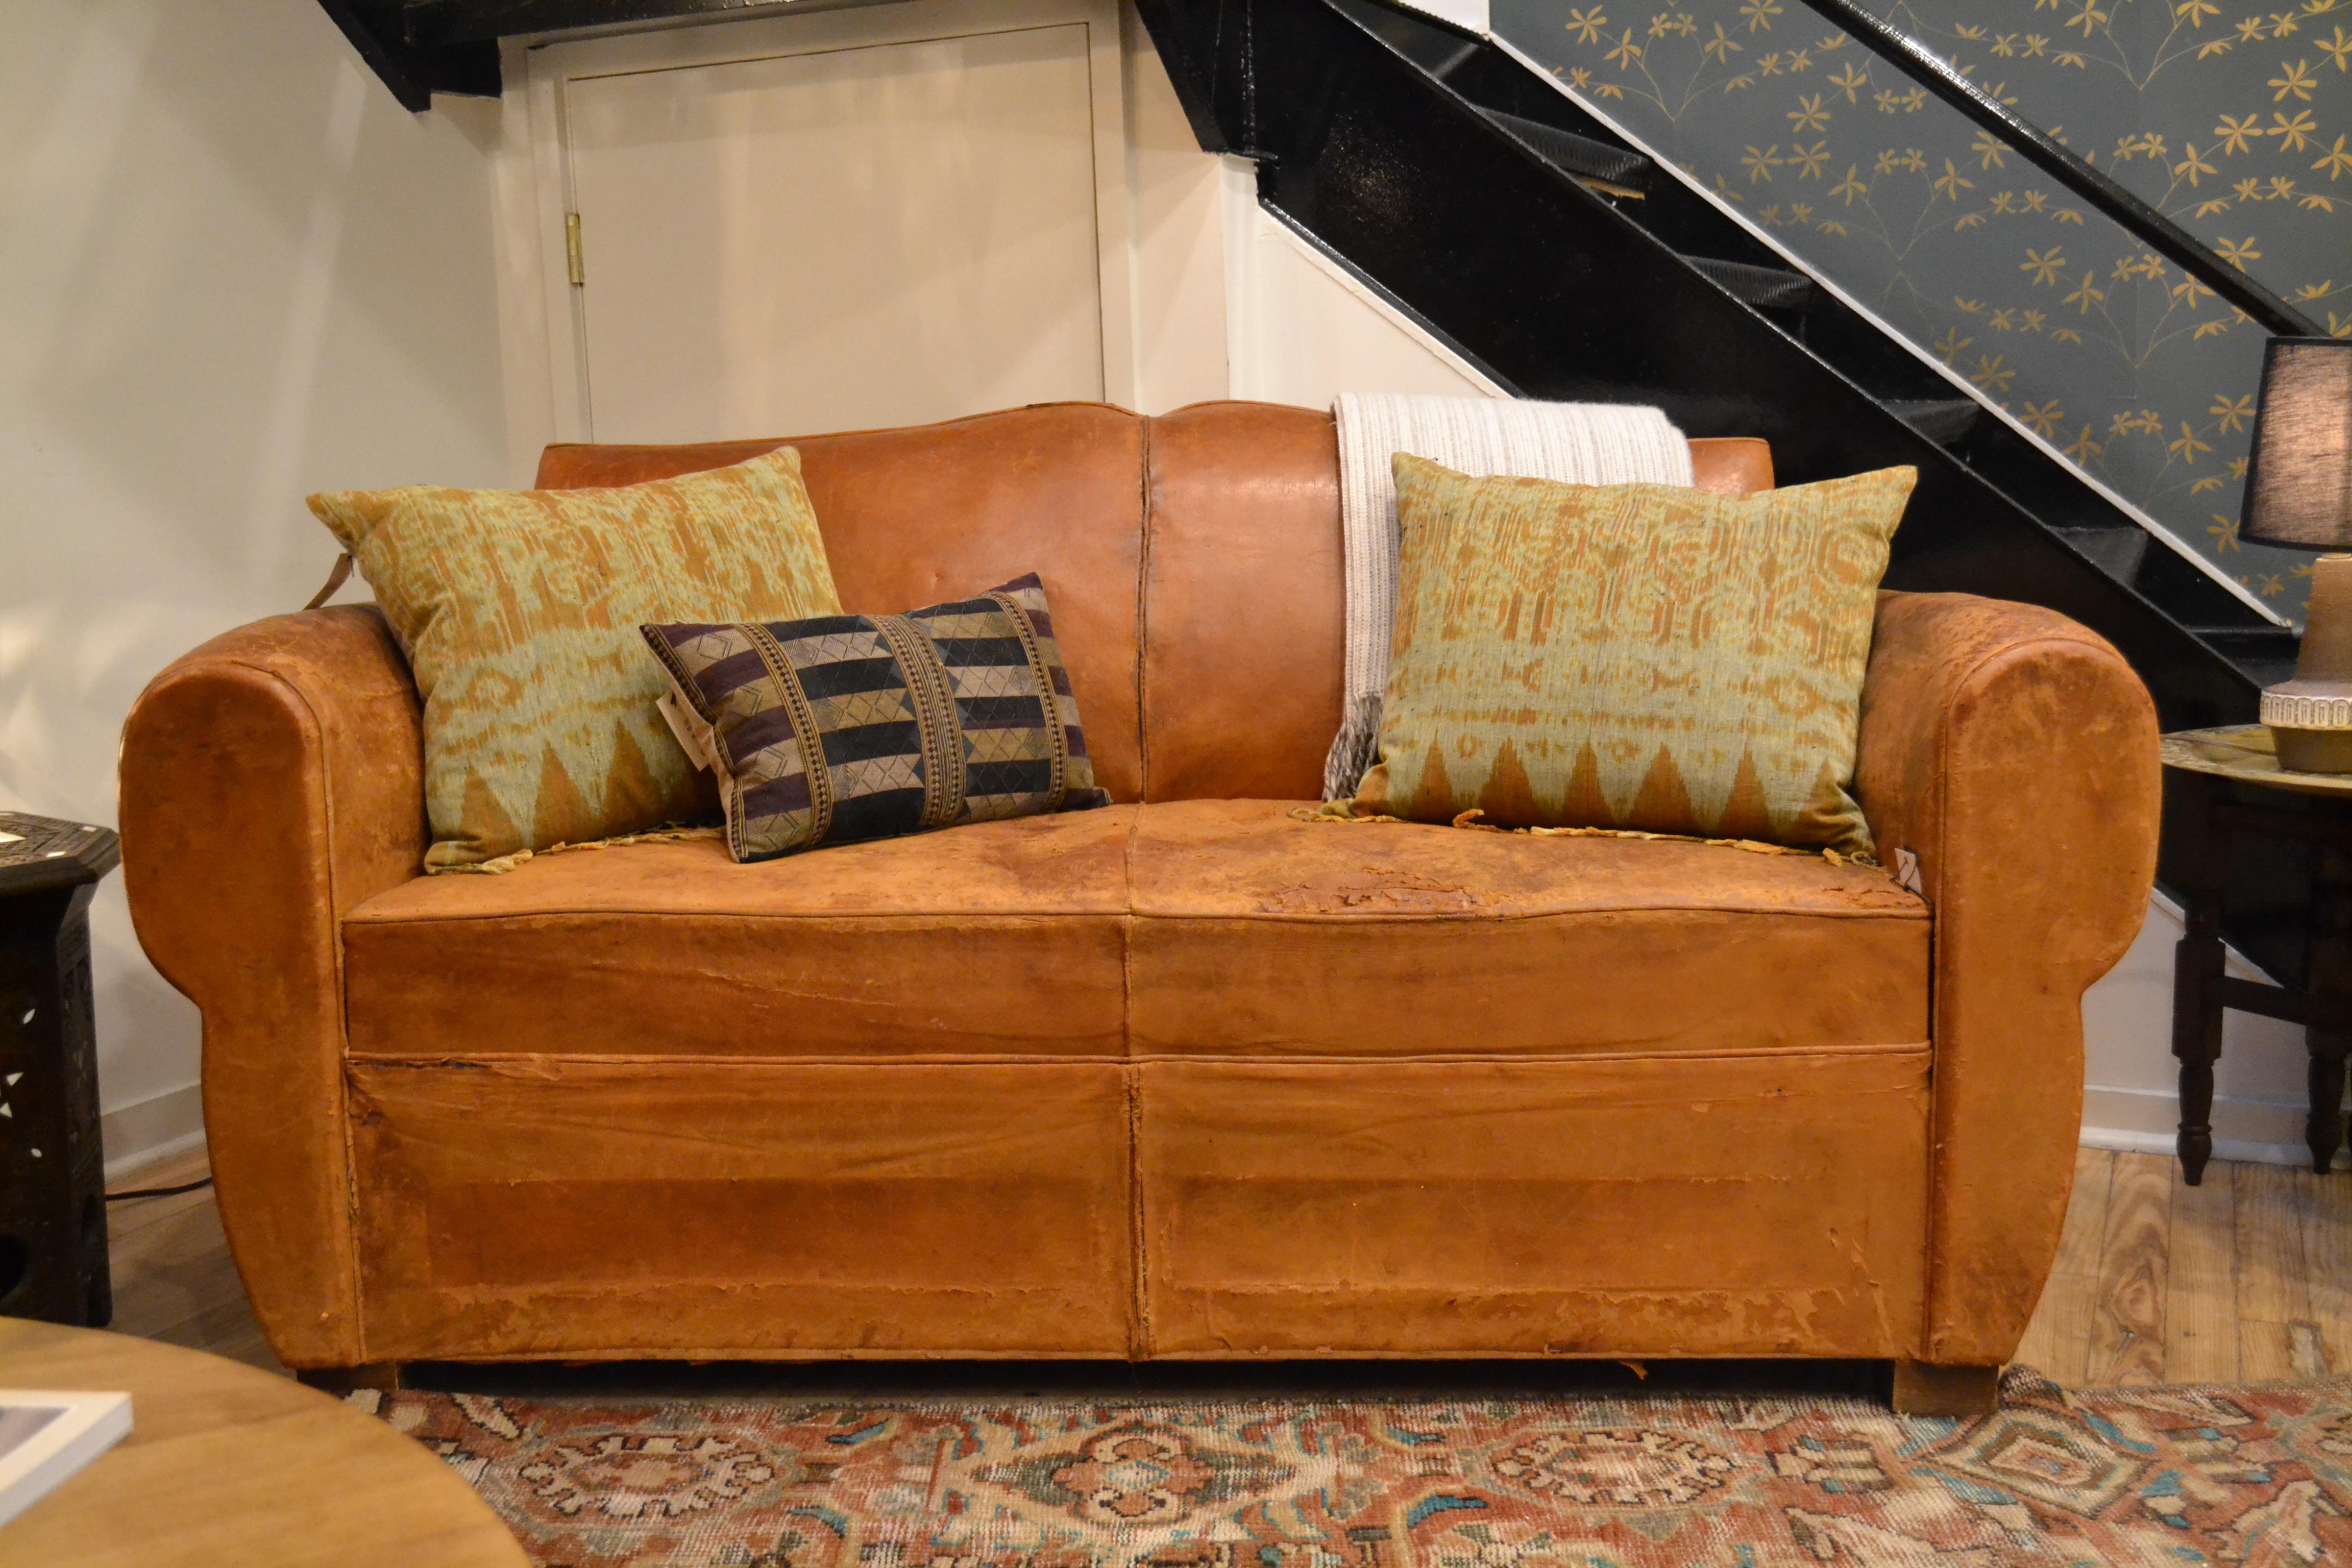 This stunning leather sofa bed originated in France, circa 1930s.
The 